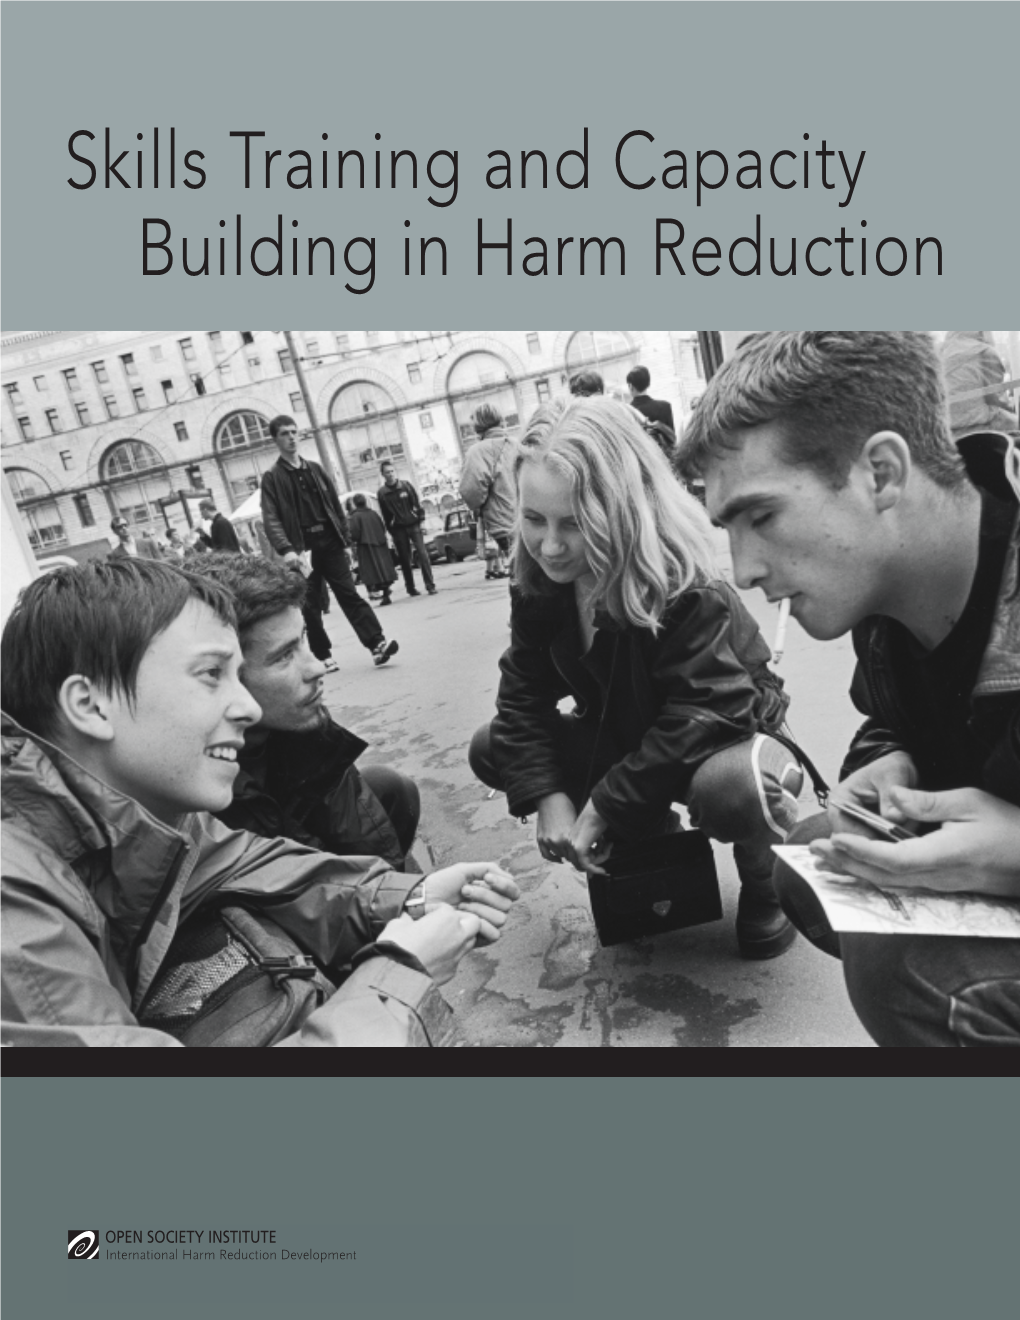 Skills Training and Capacity Building in Harm Reduction